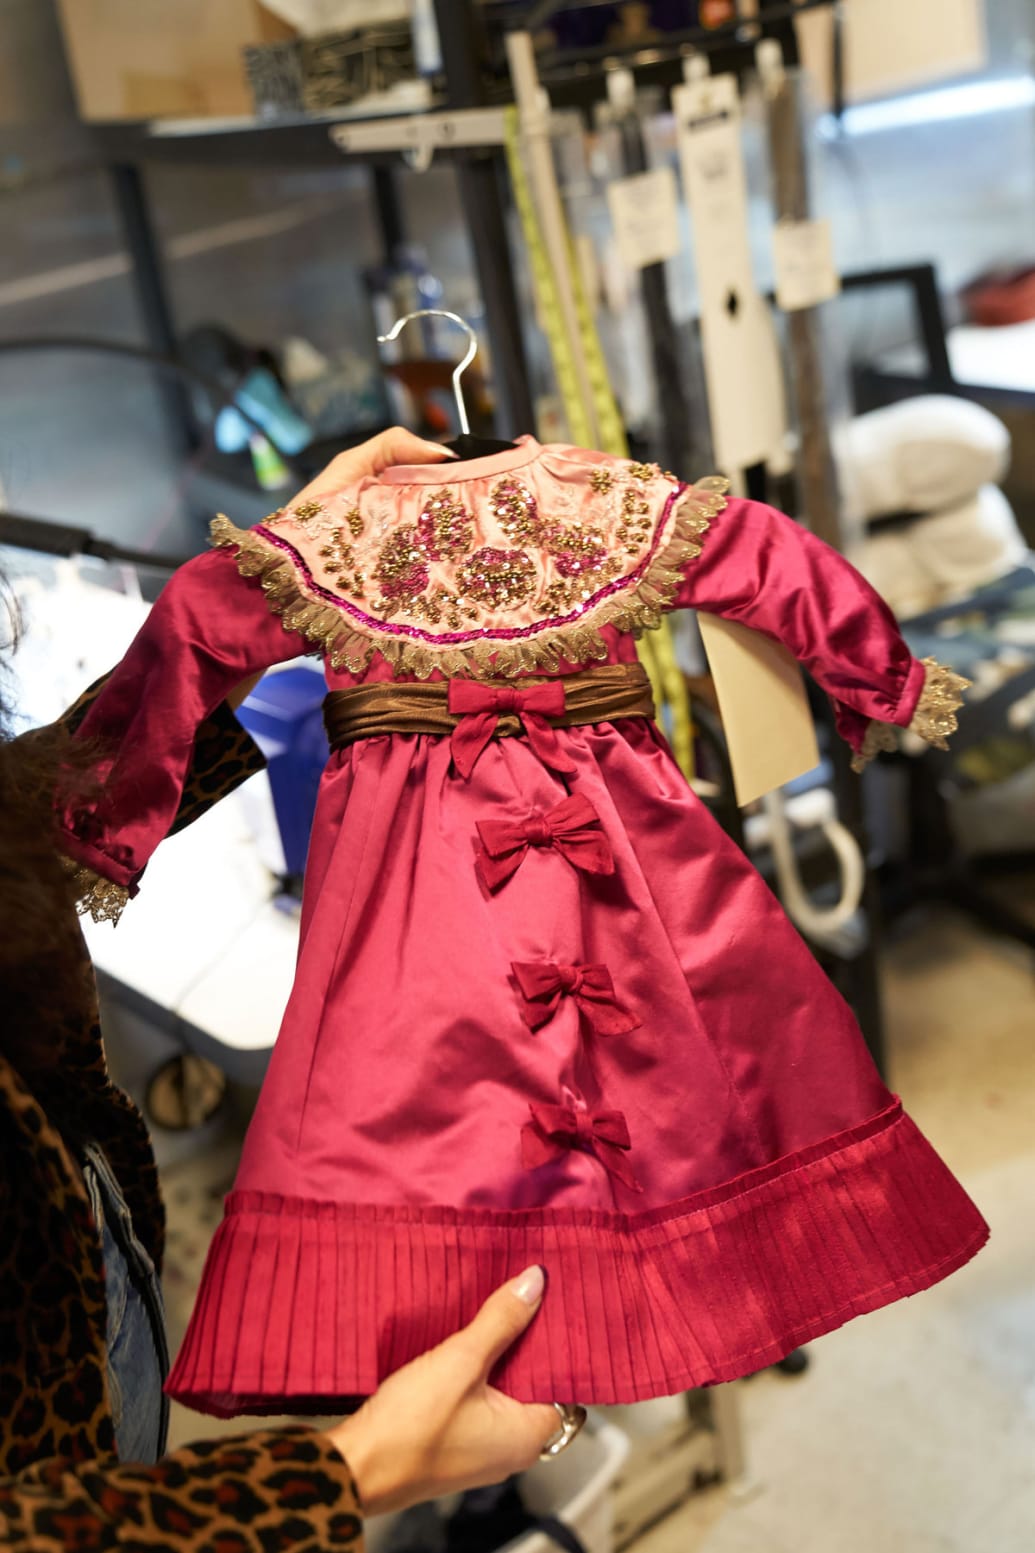 A dress worn by the Nadja doll in 'What We Do in the Shadows'